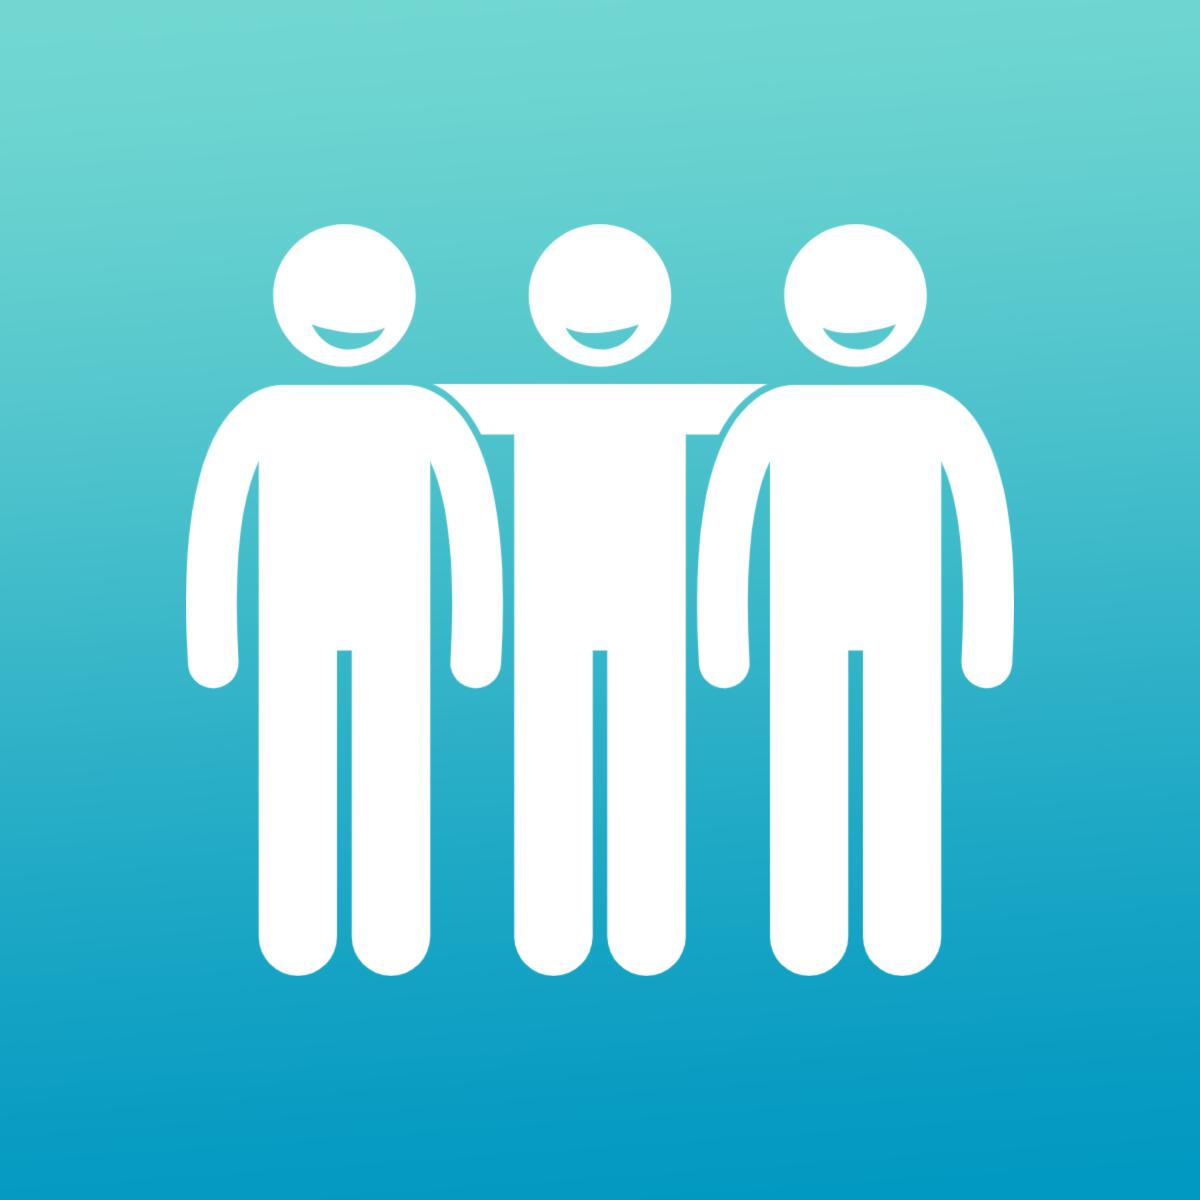 Pictogram of three people smiling